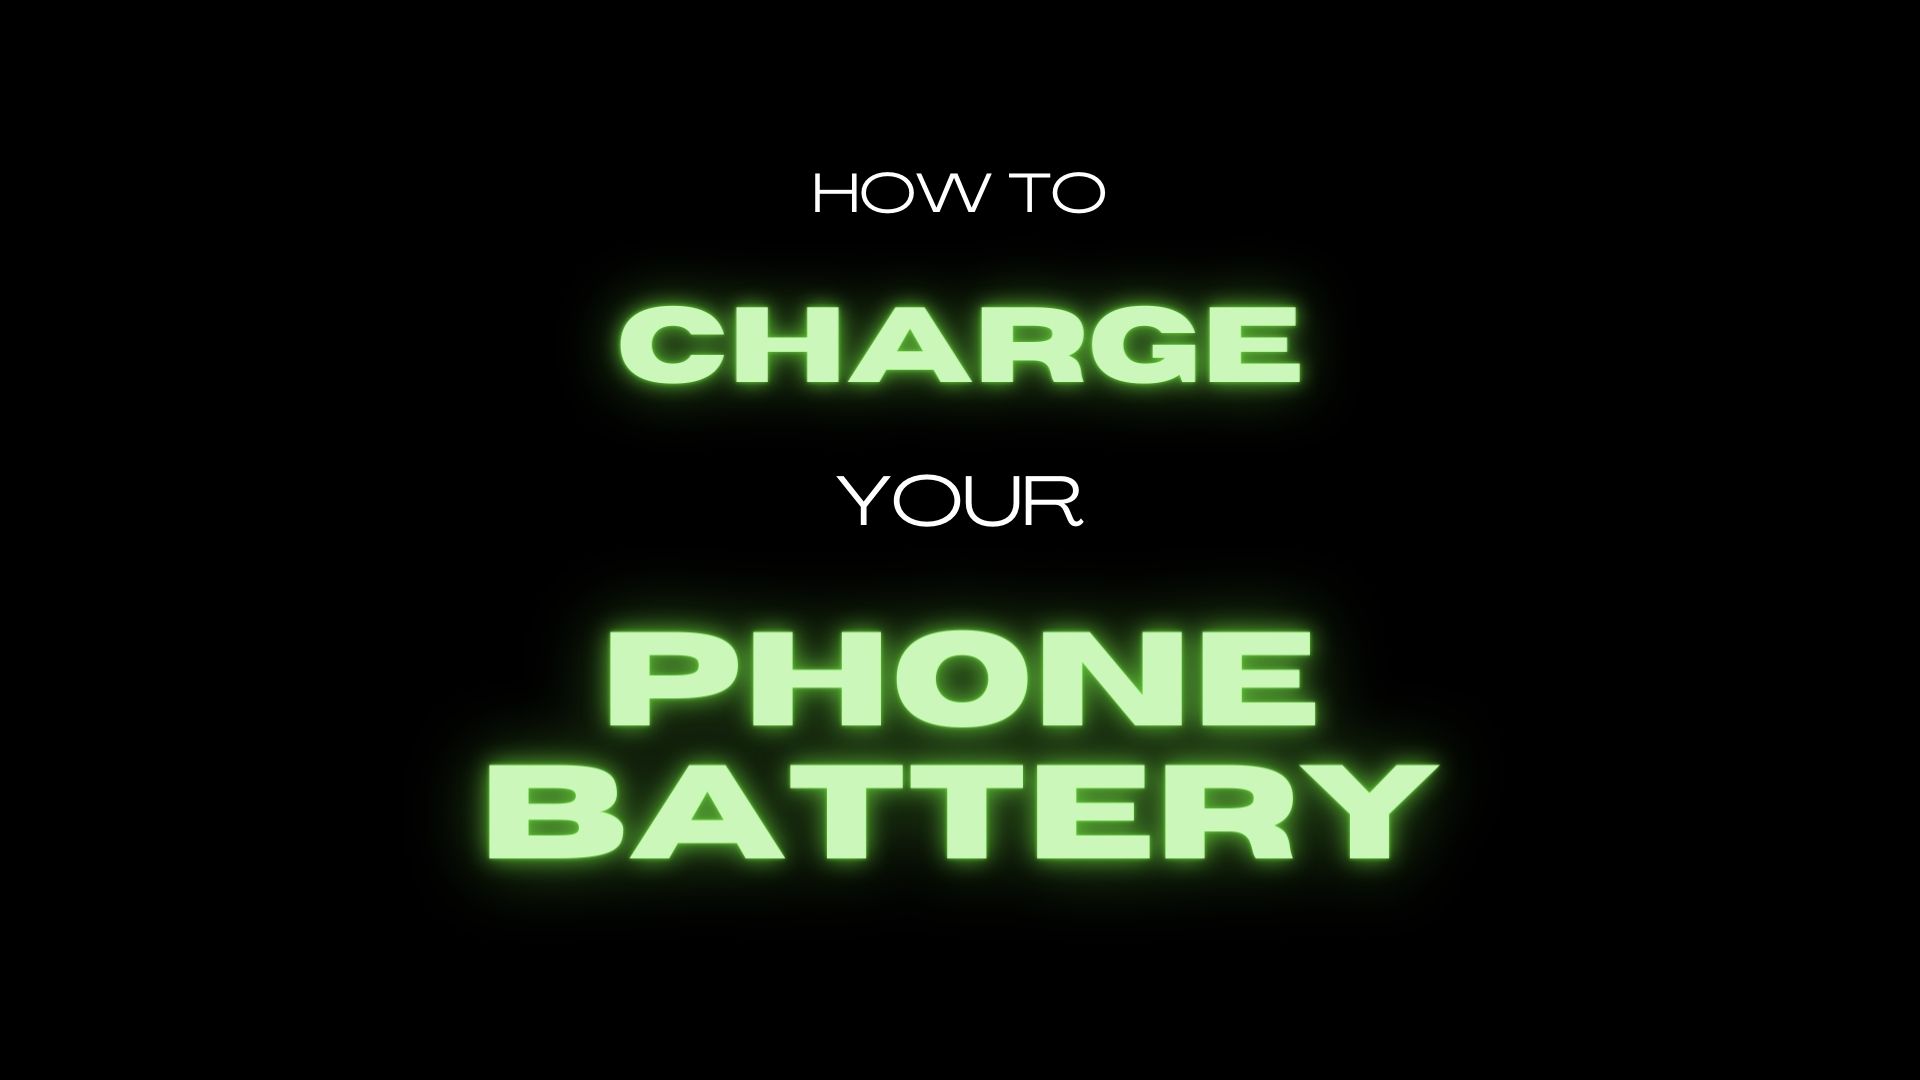 How to charge your phone battery